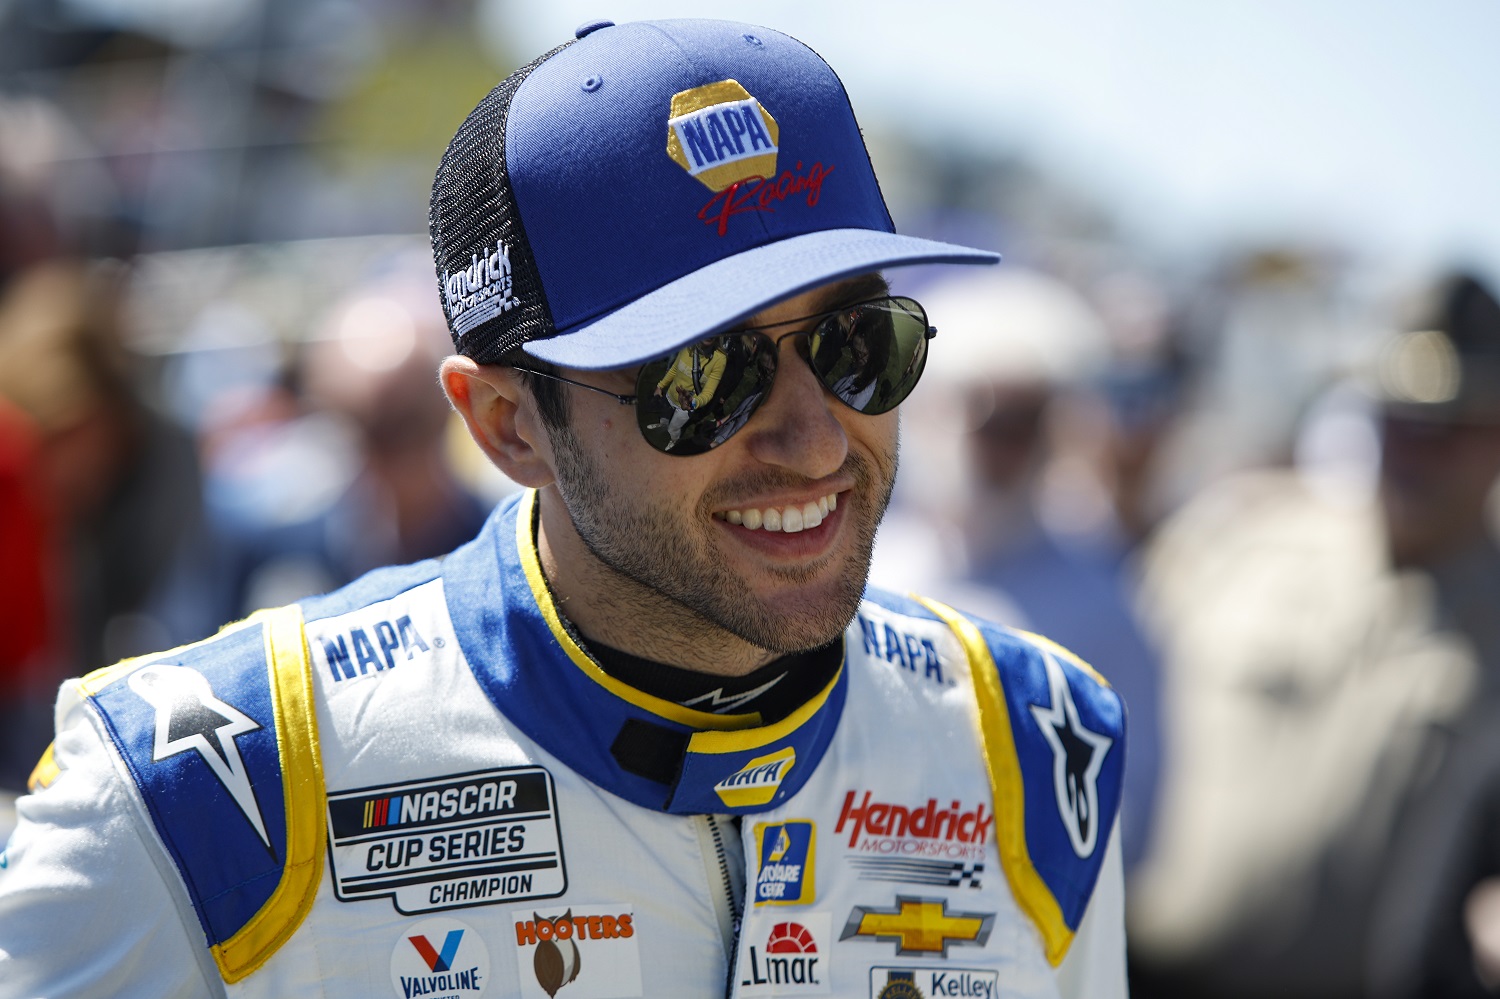 Chase Elliott waits on the grid prior to the NASCAR Cup Series Folds of Honor QuikTrip 500 at Atlanta Motor Speedway on March 20, 2022.